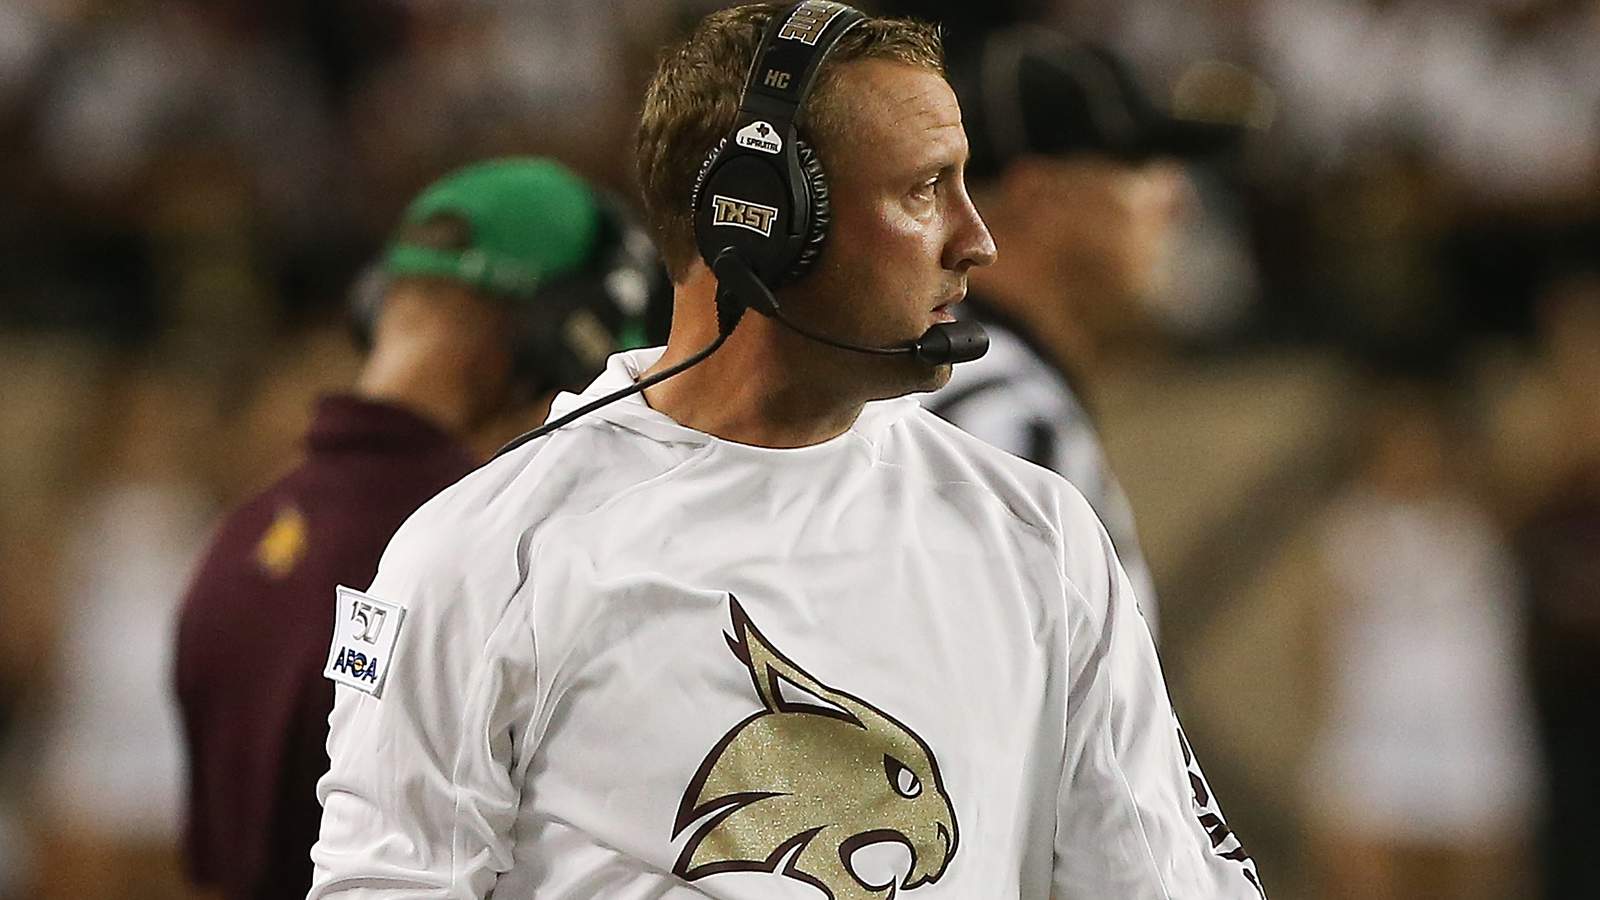 Texas State football player opts out of season due to COVID-19 pandemic